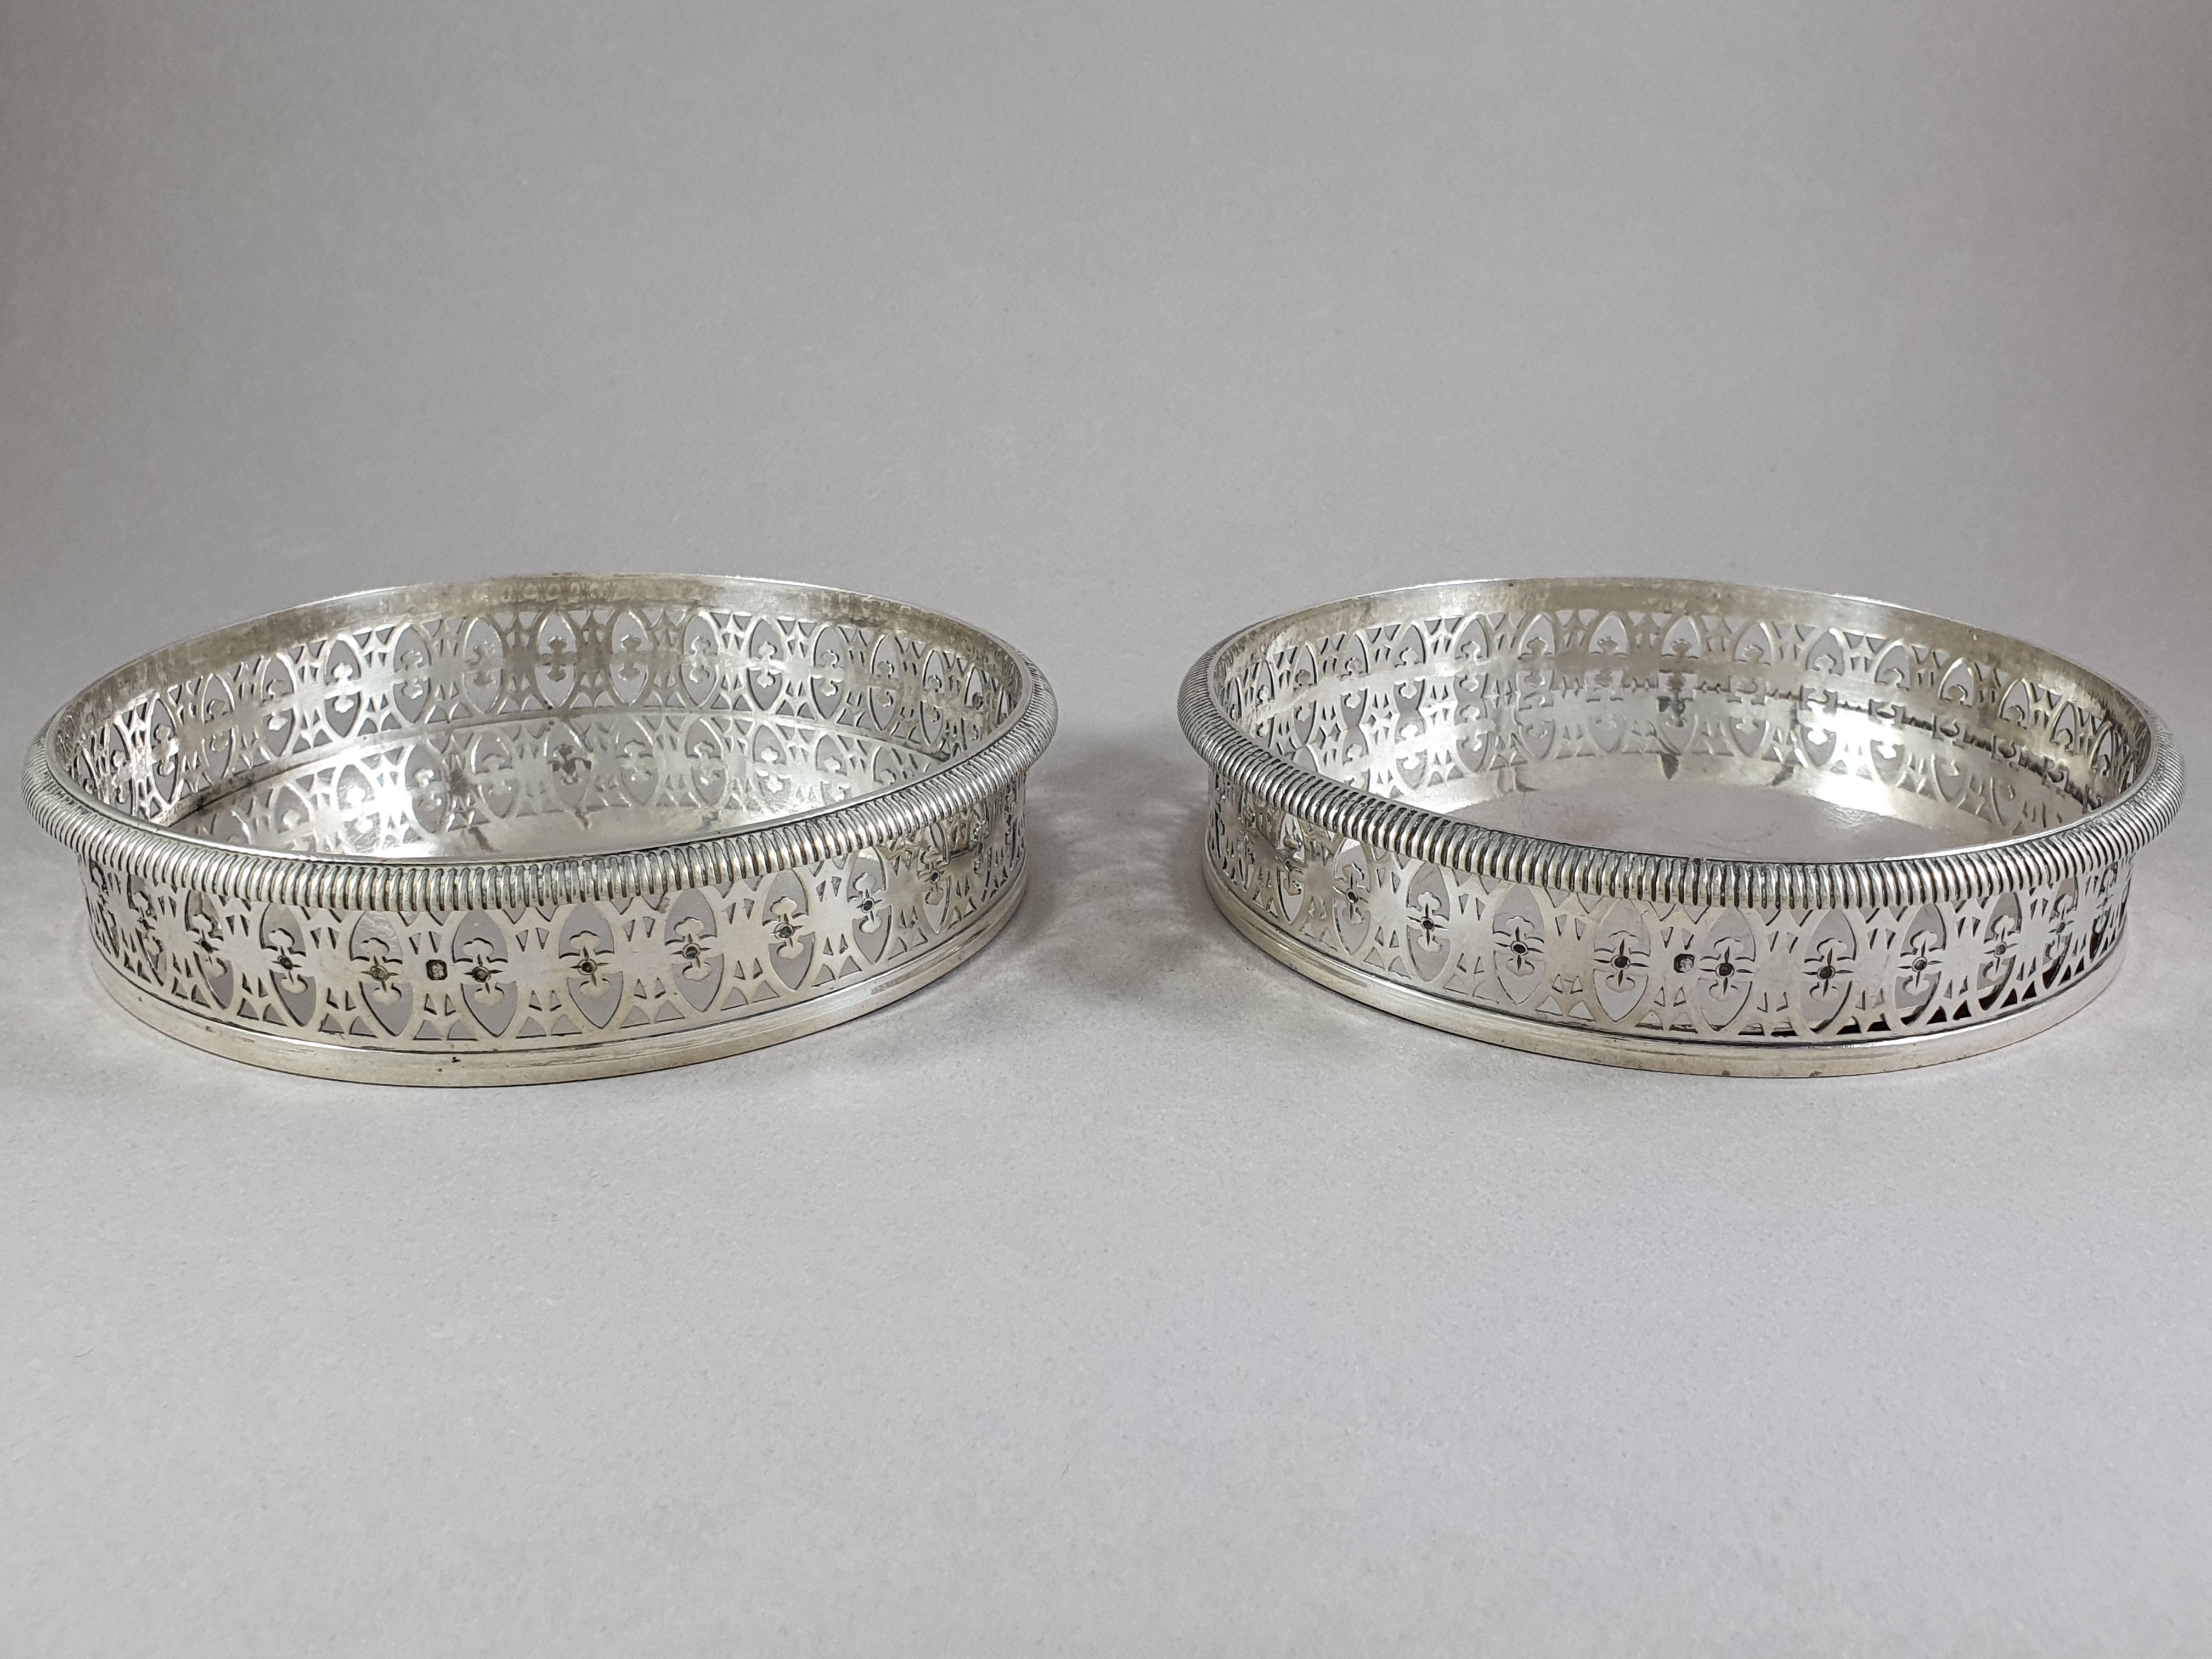 Pair of French Sterling Silver bottle coasters circa 1850

Decorated with gadroons

Hallmarked Minerva 1st title for 950/1000 purity silver

Diameter: 13.6 cm 
Height: 2.8 cm 
Weight: 525 grams

Good condition